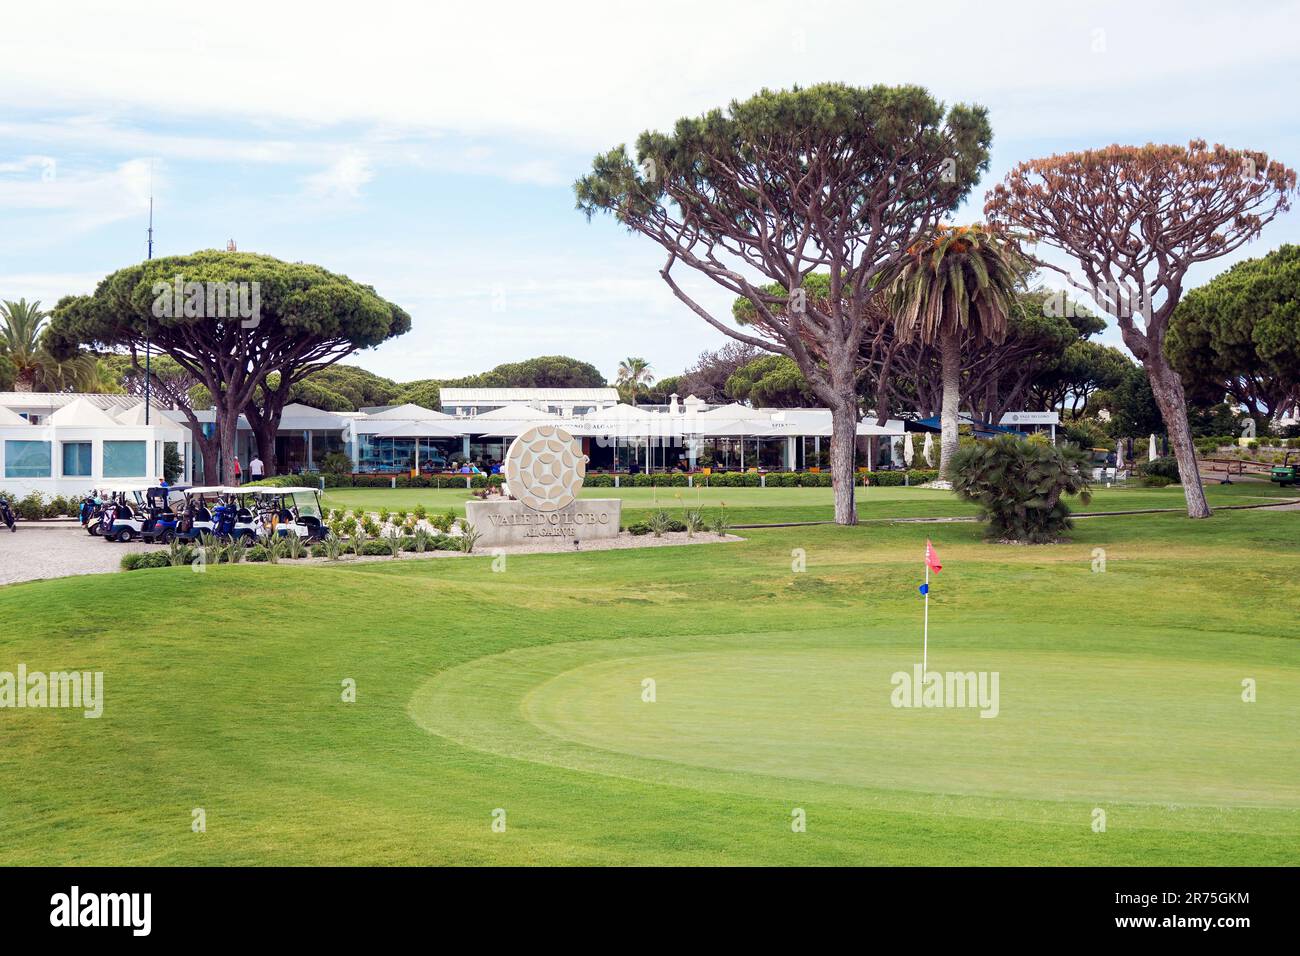 Welcome sign at Vale do Lobo golf club and course, with golf buggies and golf clubs, and a view to the club house and restaurant over the 18th green, Stock Photo